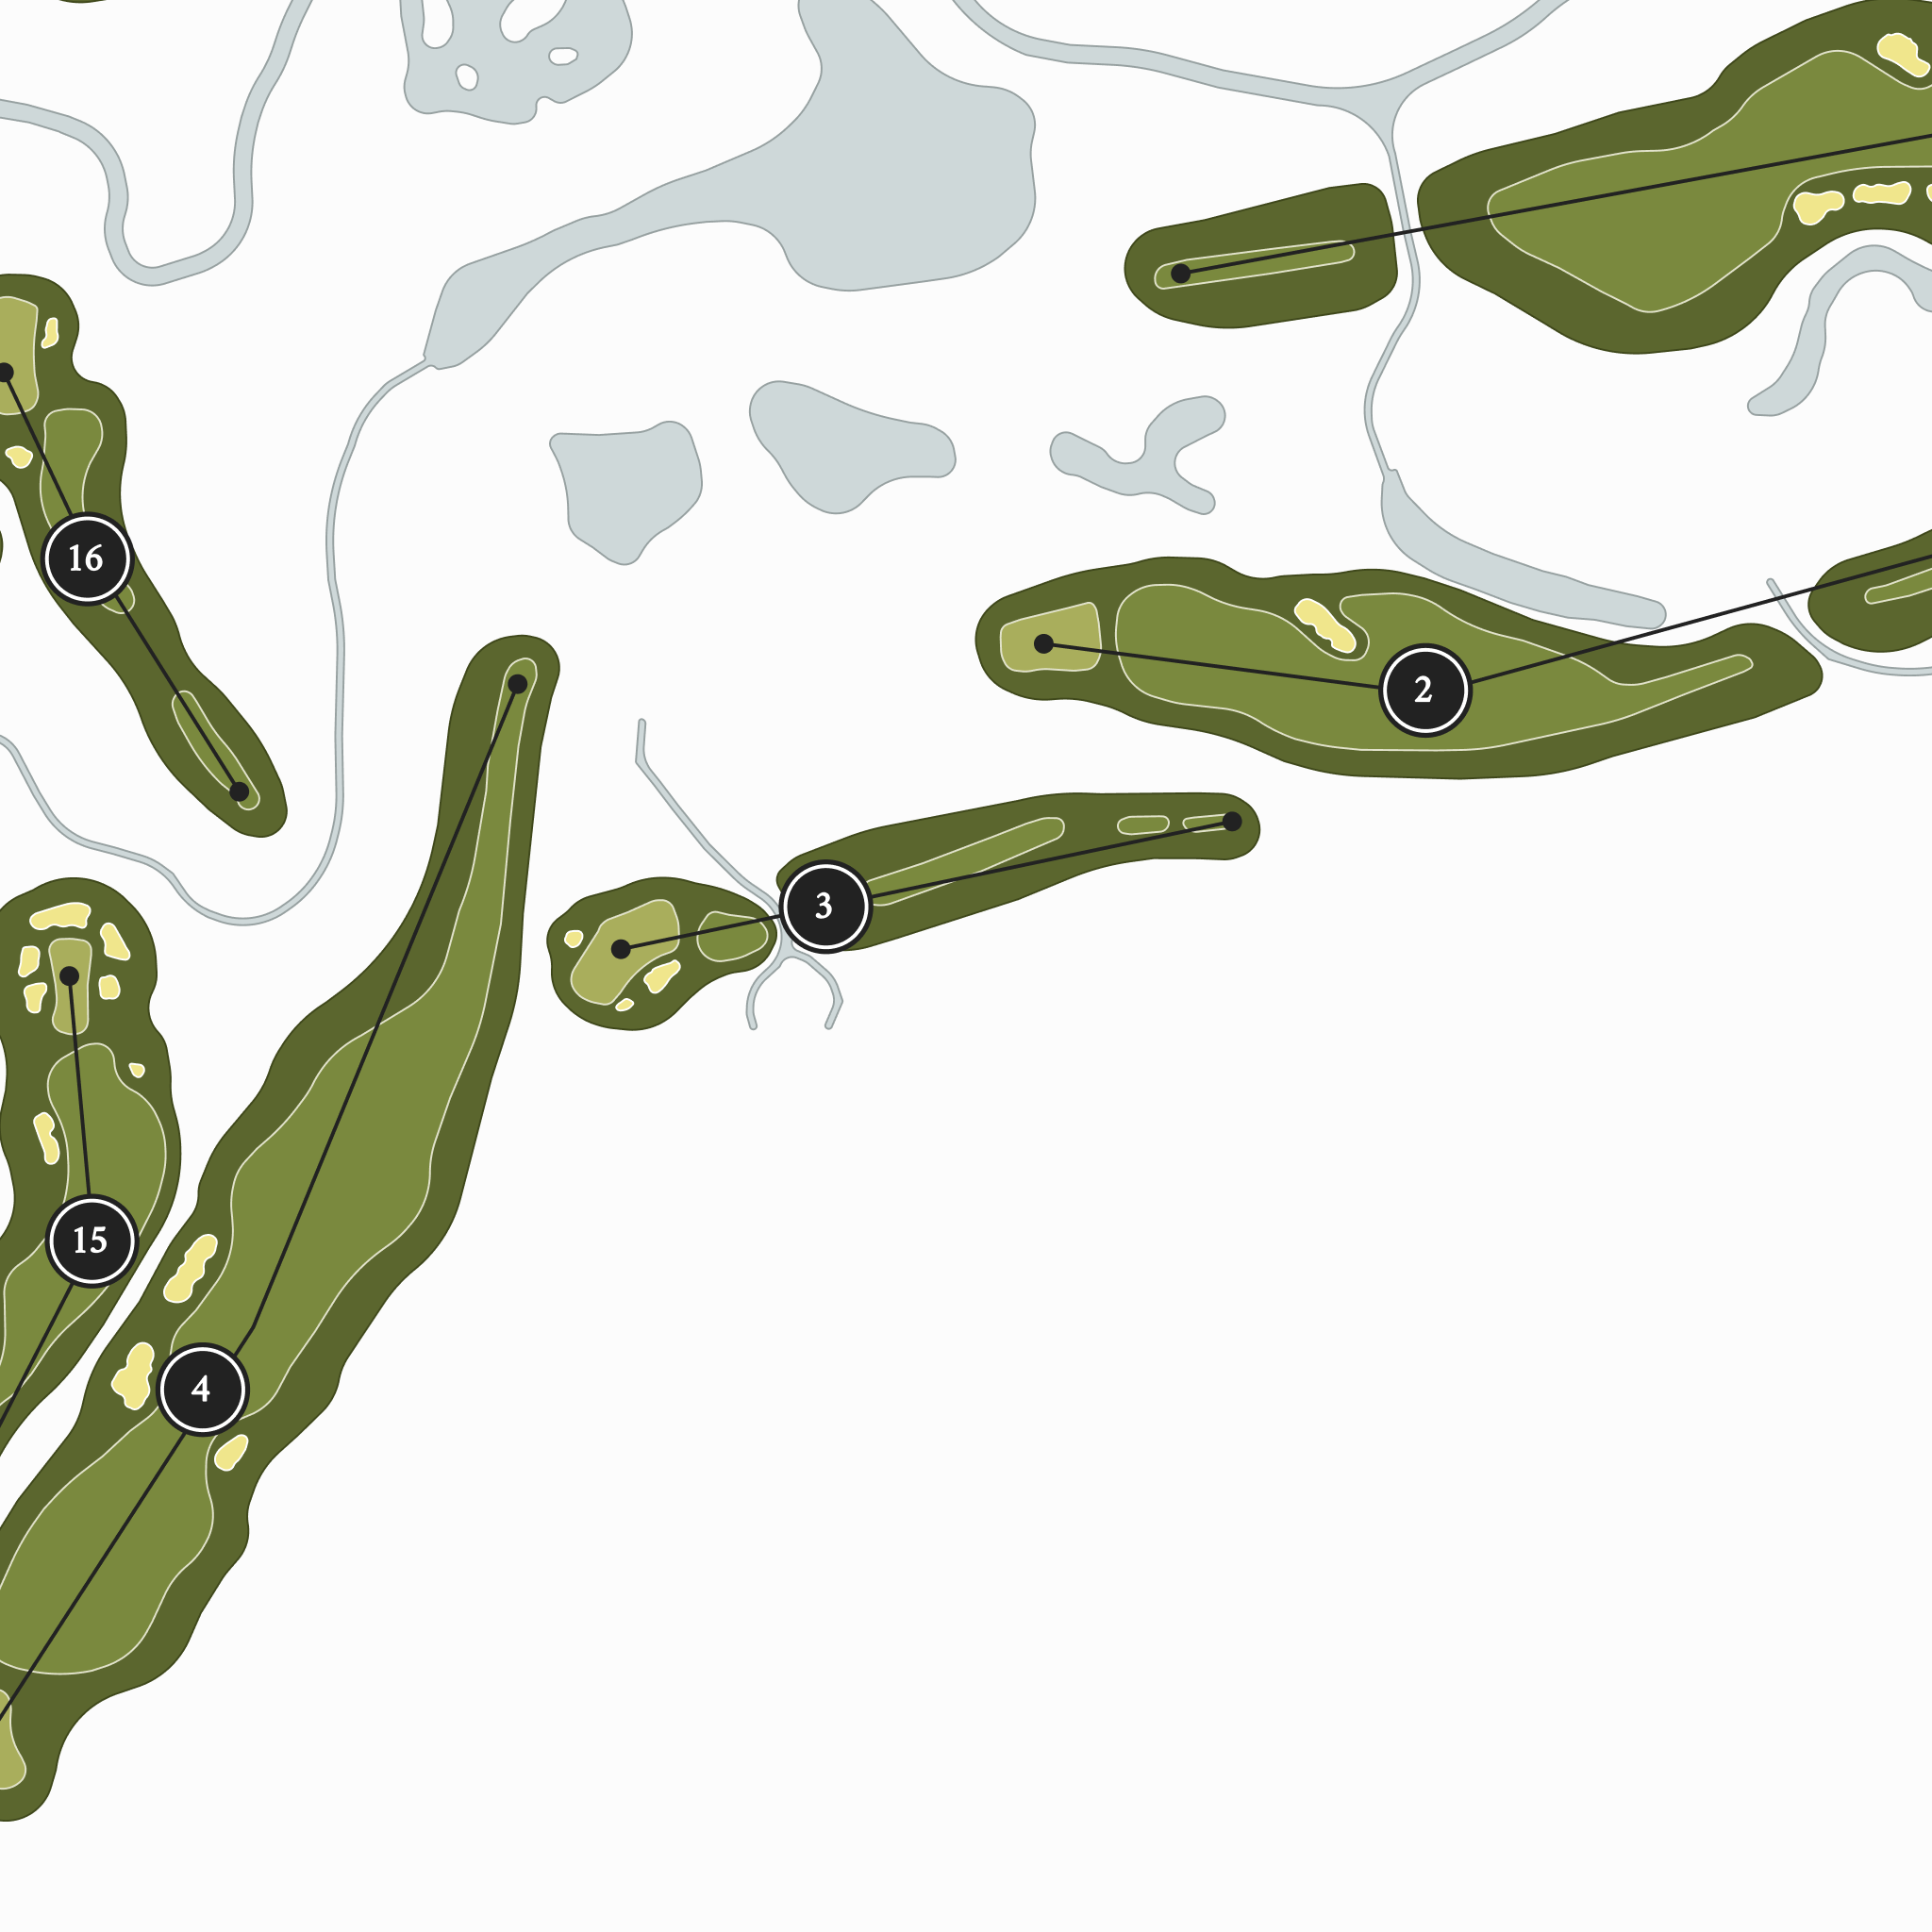 Fields Ranch - West Course | Golf Course Map | Close Up With Hole Numbers #hole numbers_yes